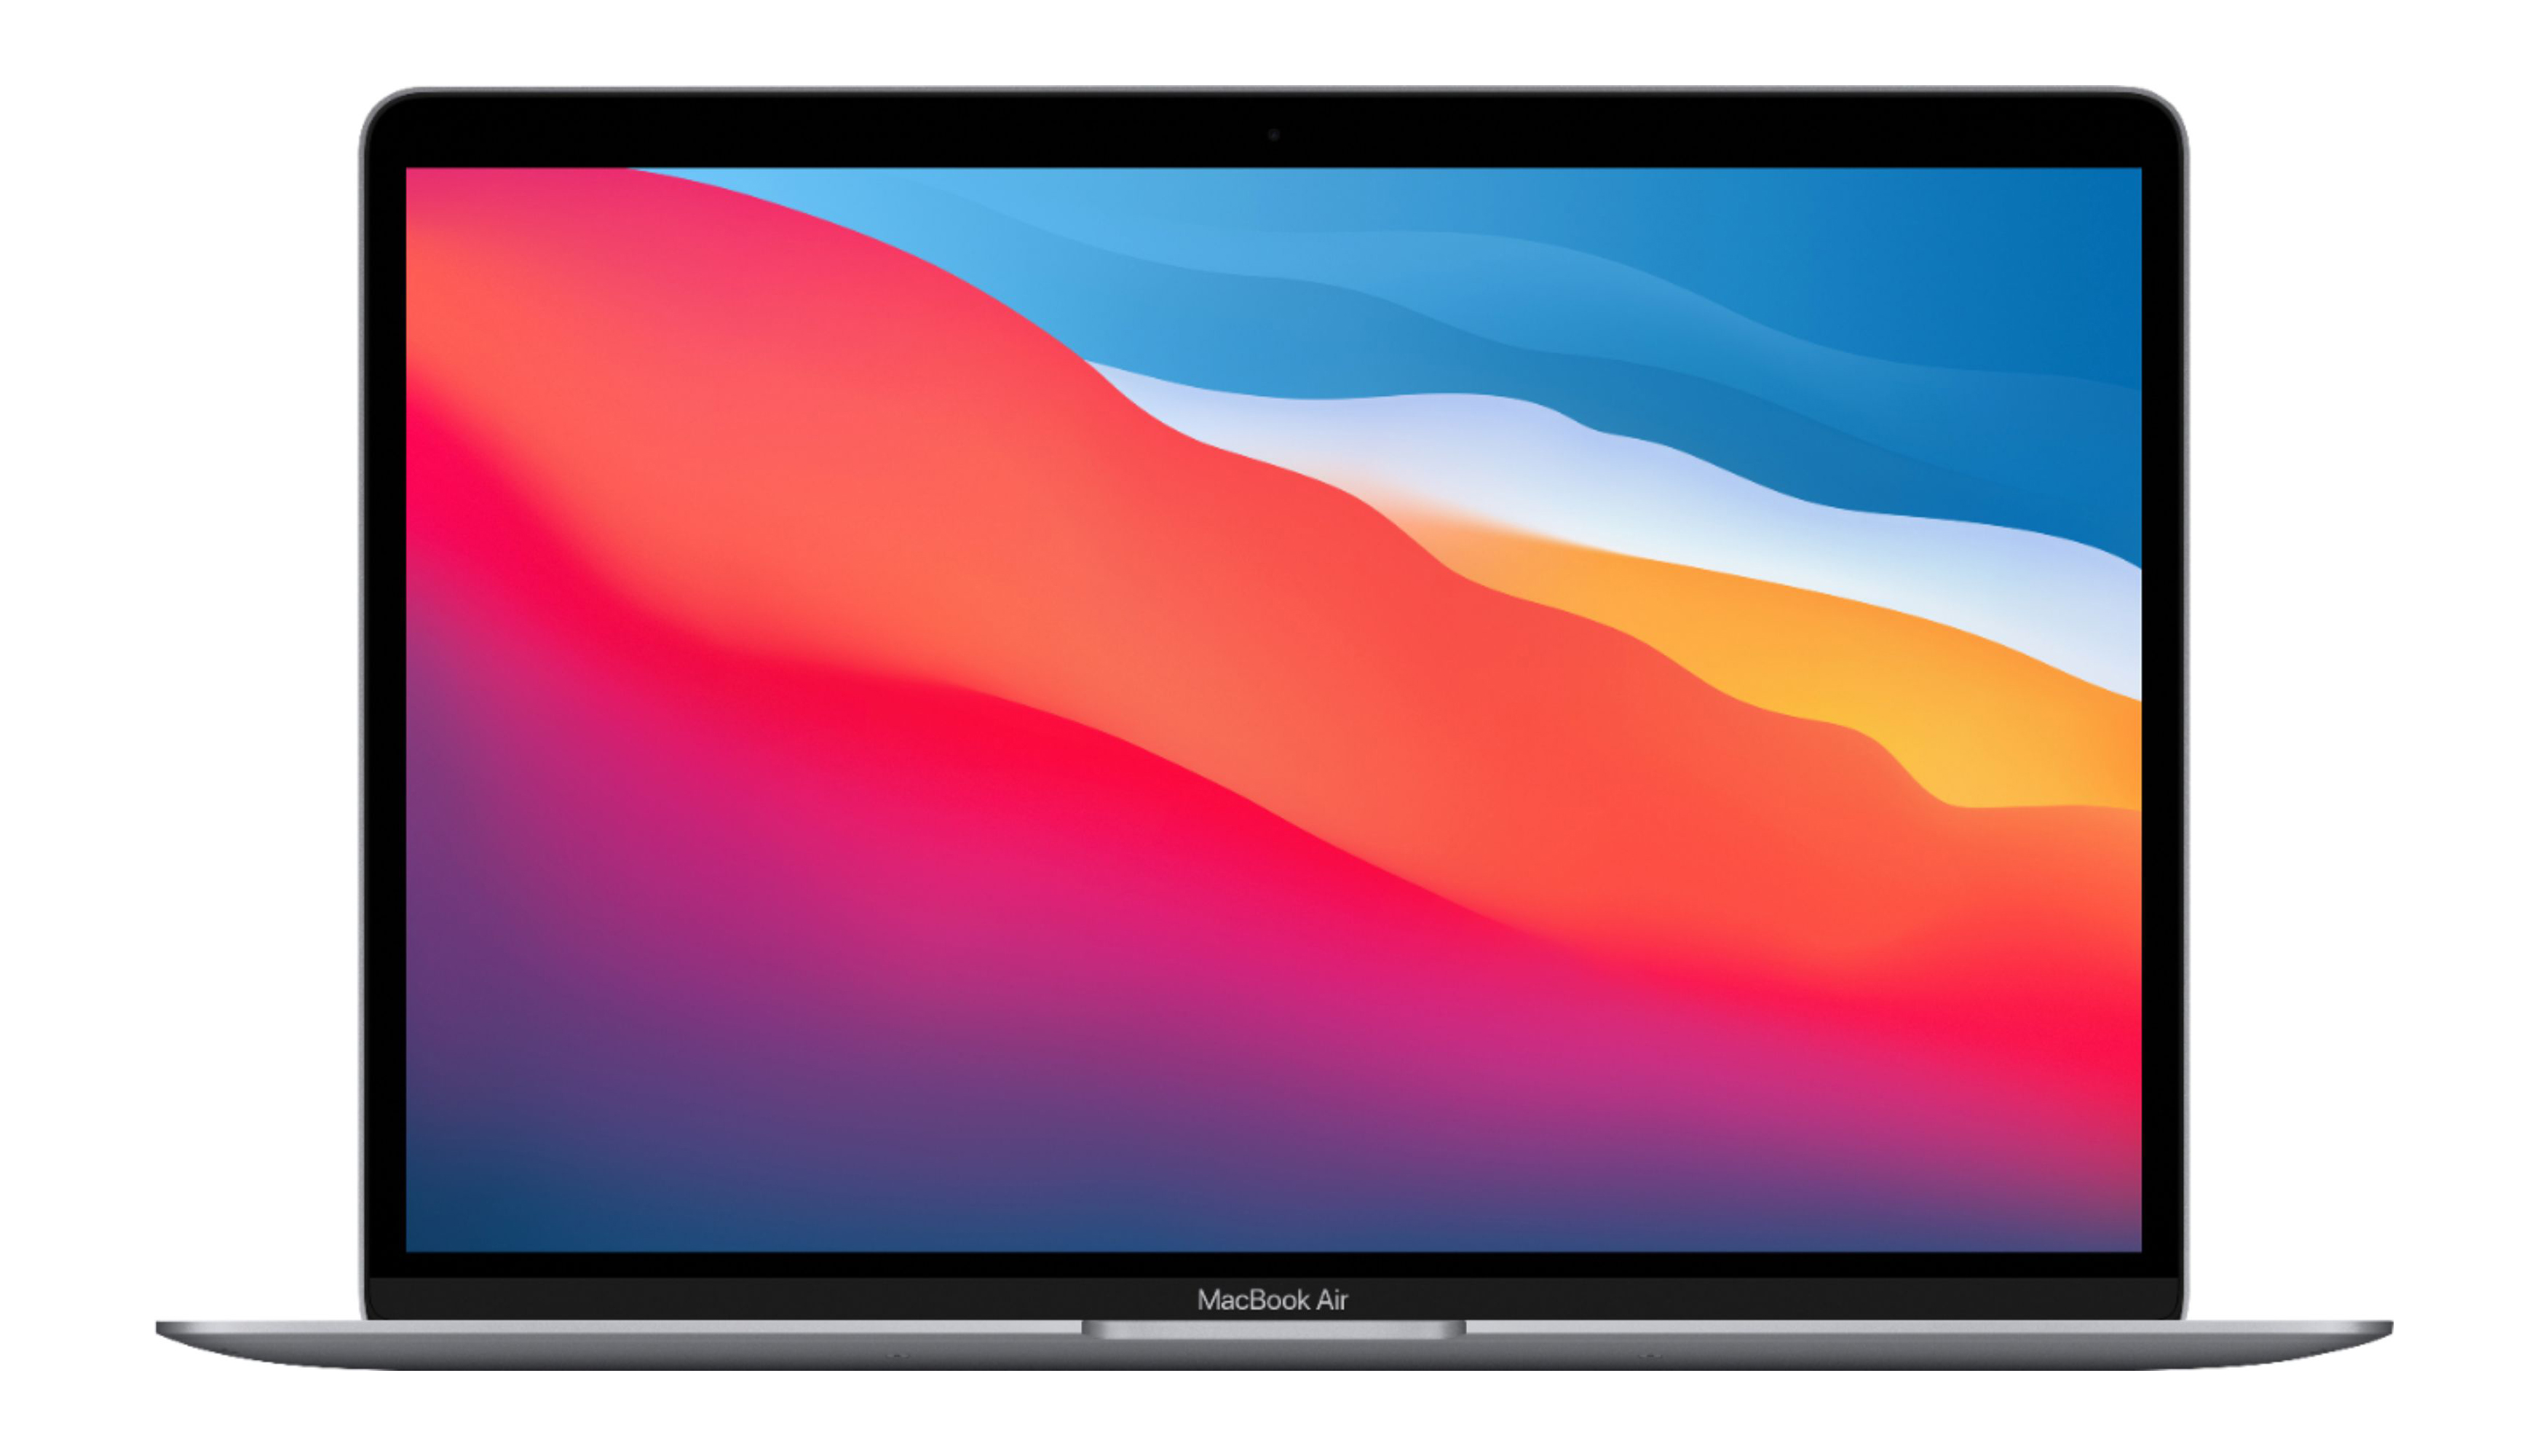 The MacBook Air (M1, 2020) is portable, powerful and comes with a long battery life.